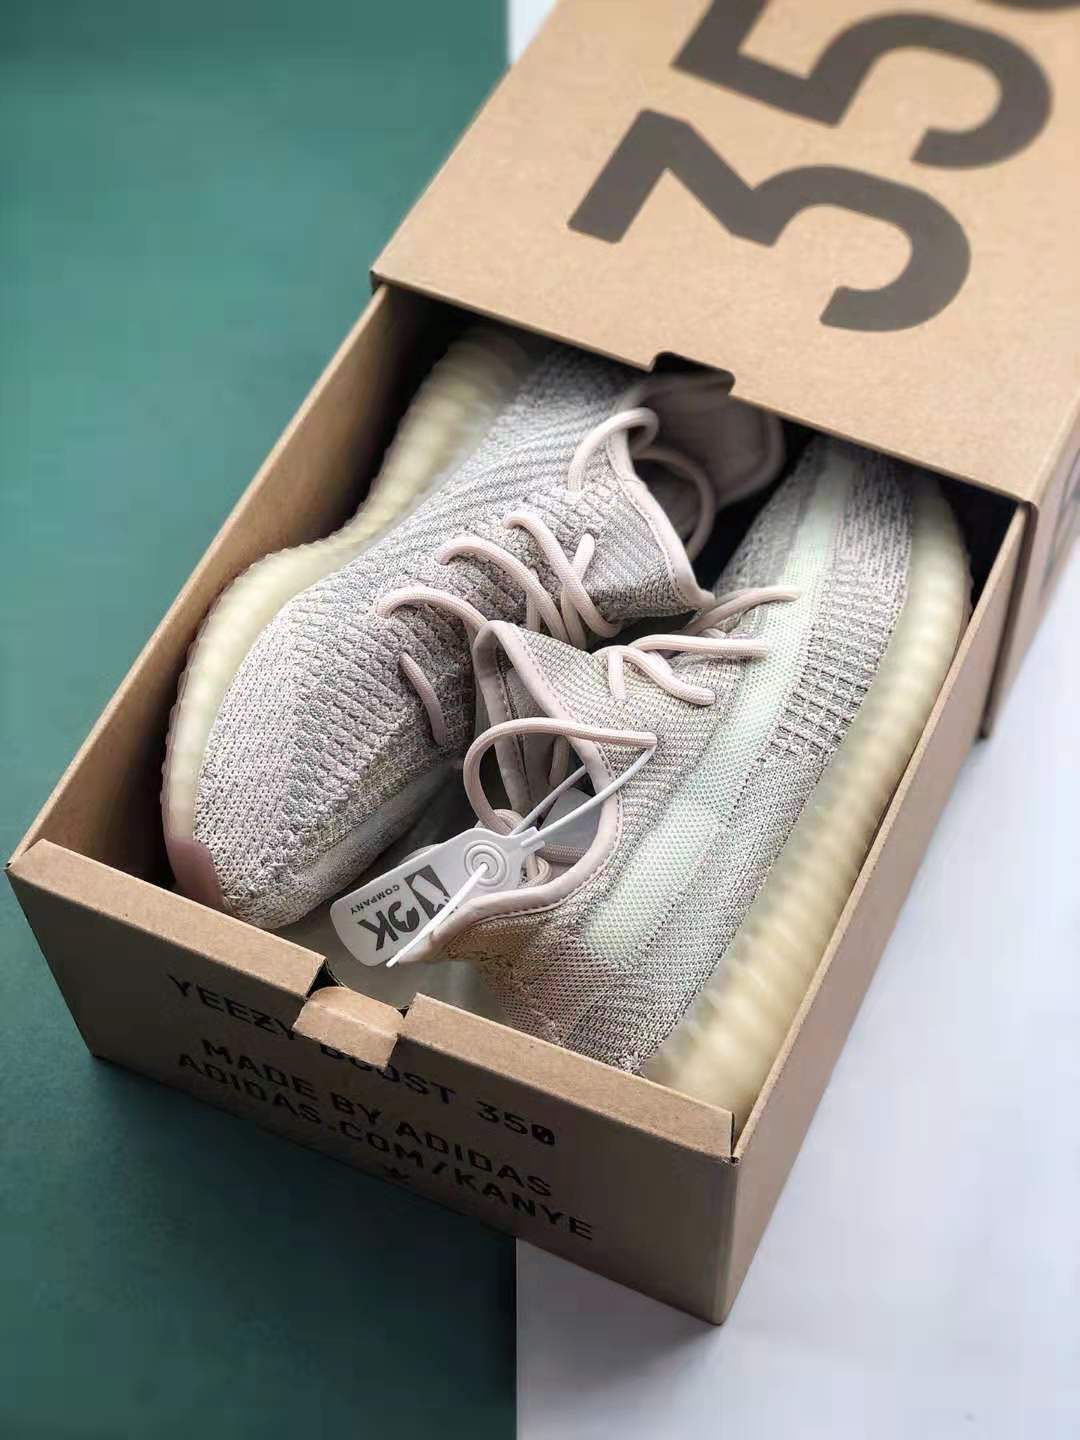 Adidas Yeezy Boost 350 V2 Citrin Non-Reflective - Fashionable Footwear for Style Enthusiasts